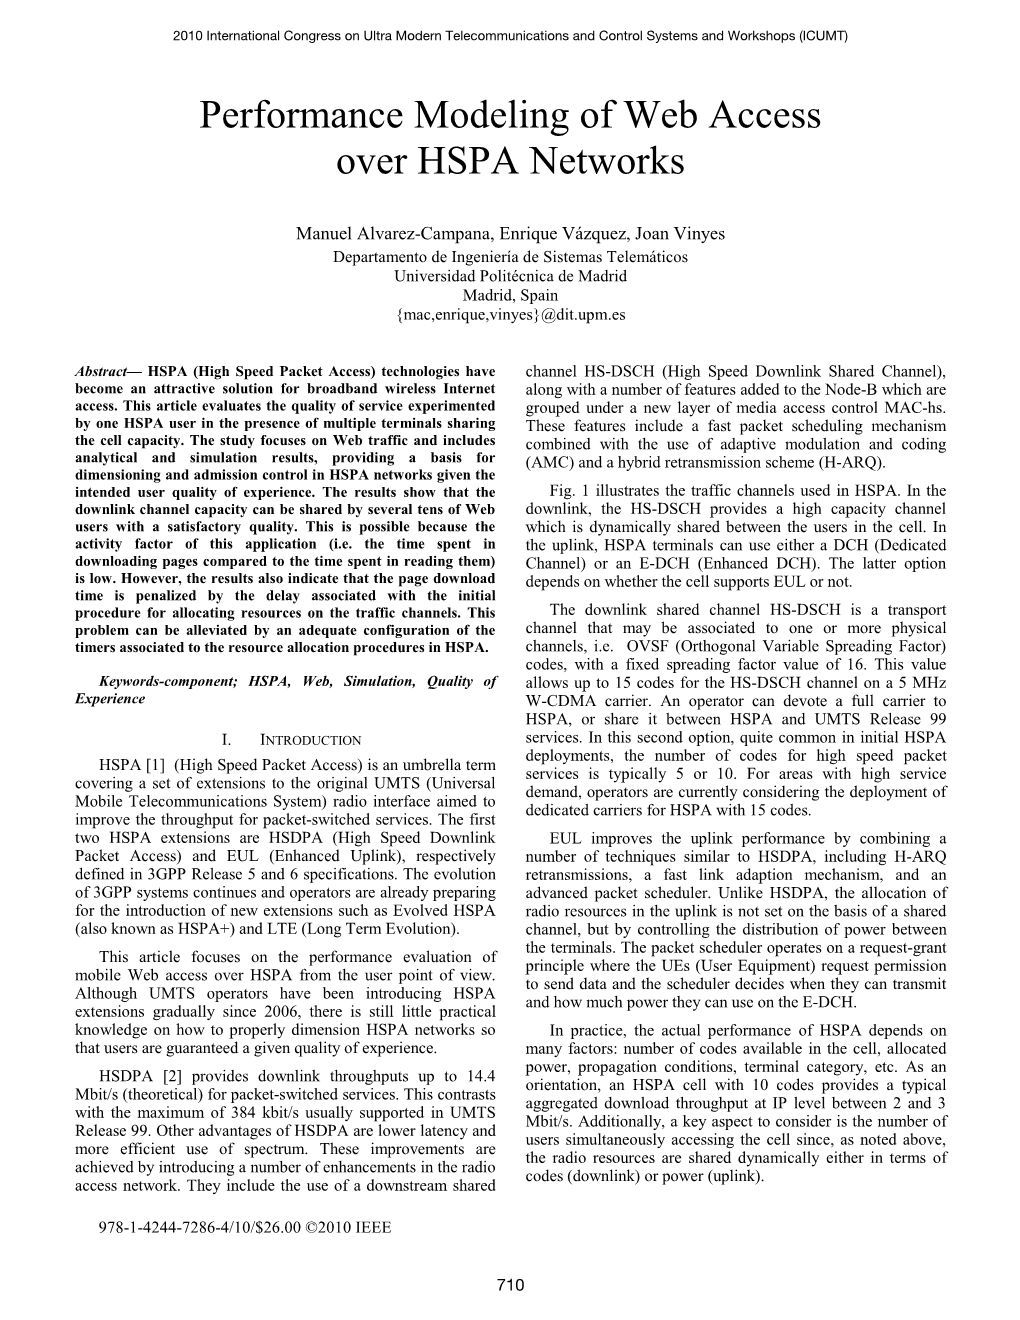 Performance Modeling of Web Access Over HSPA Networks